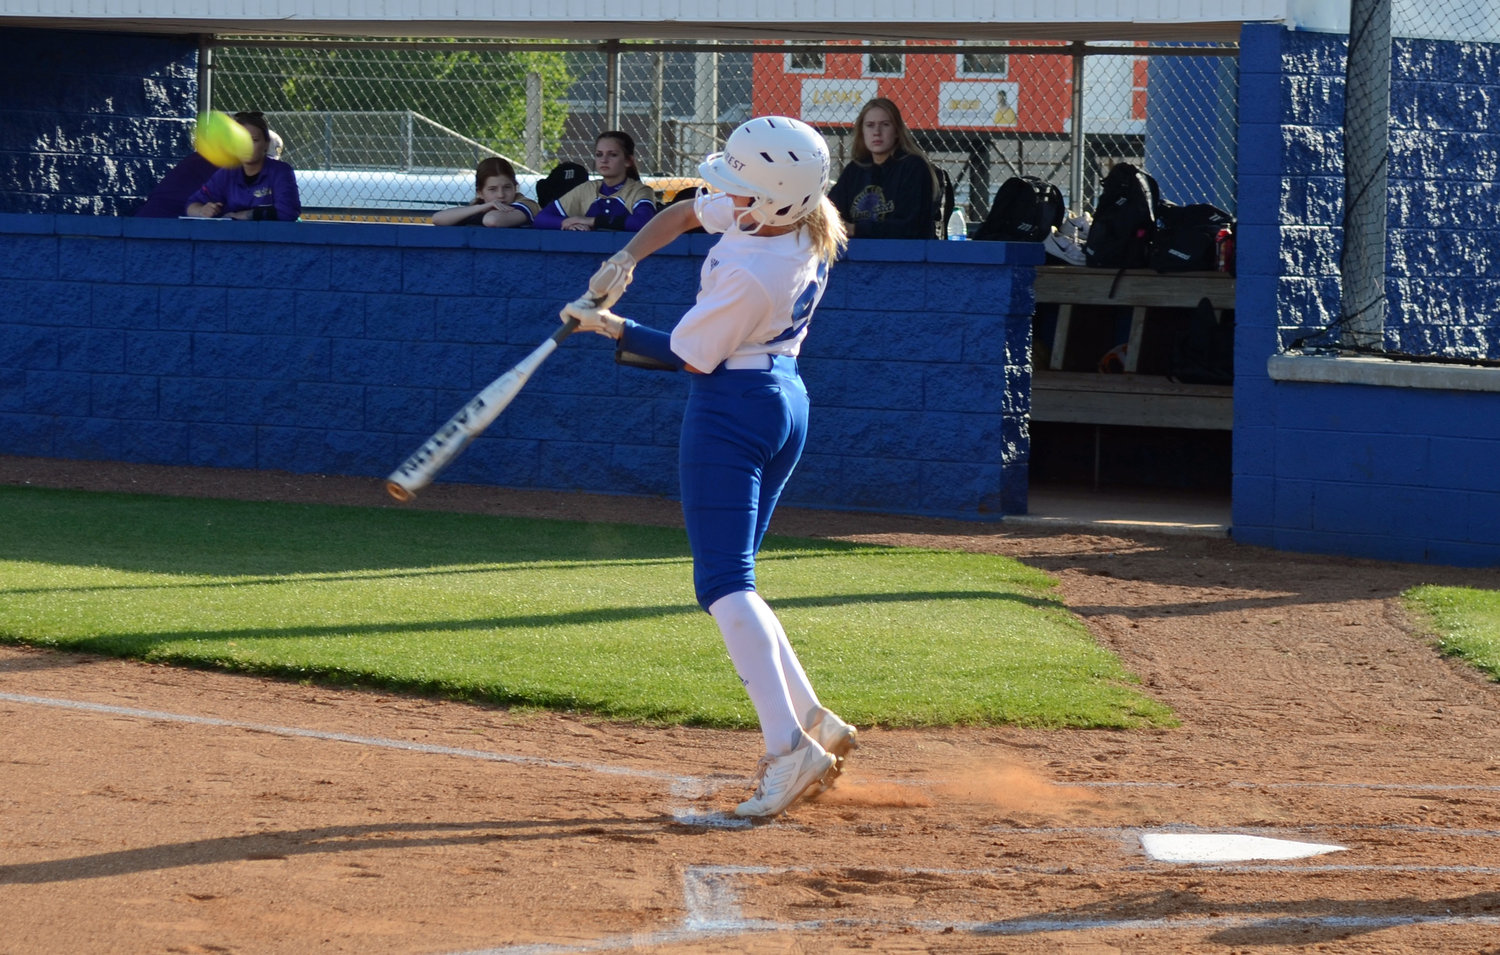 Macyn Kirby went a perfect 3-for-3 at the plate for the Lady Rockets.